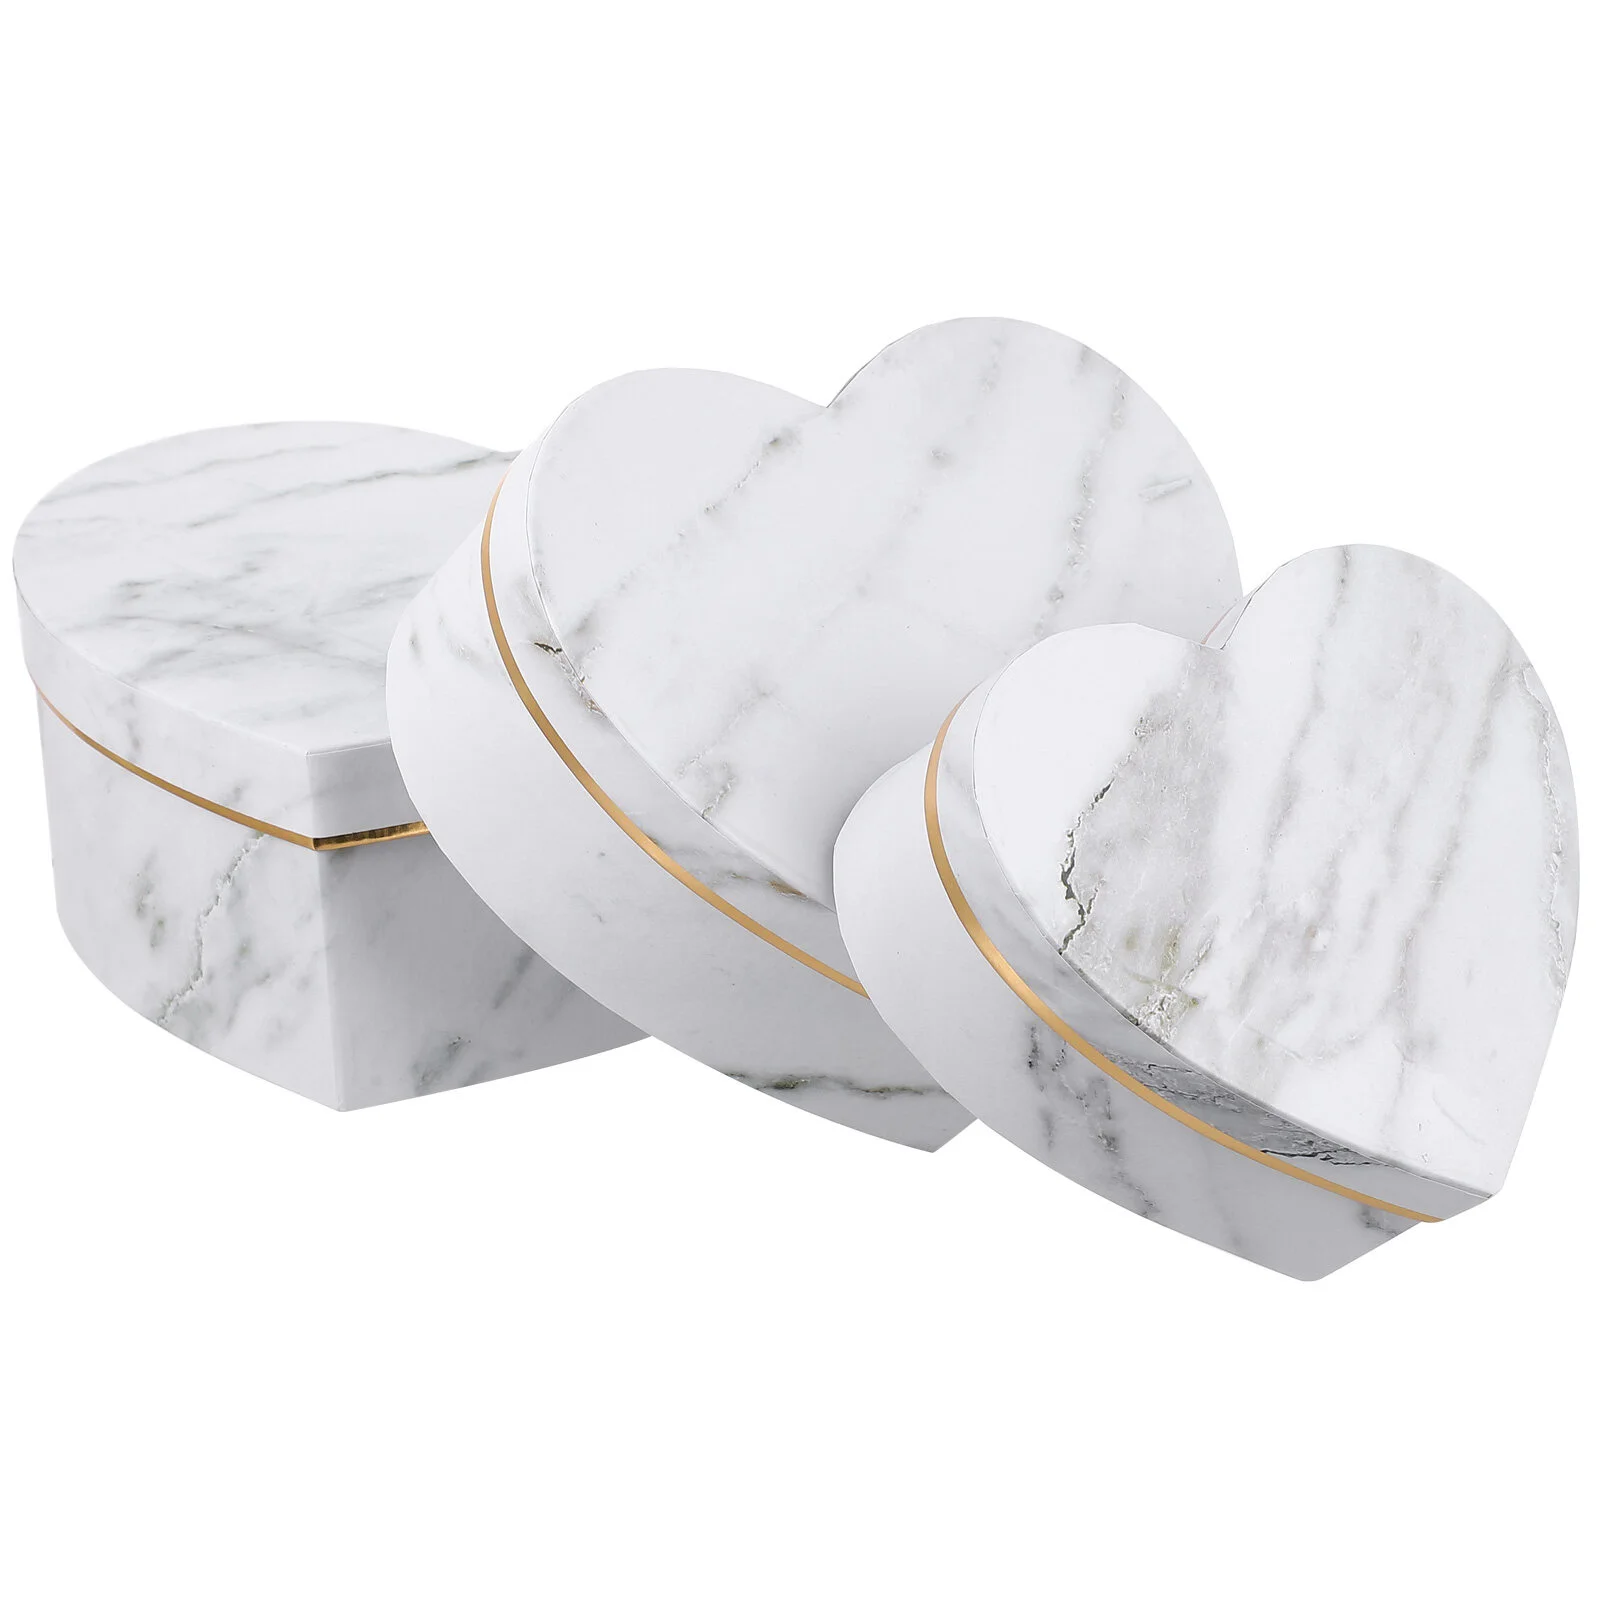 

3pcs Marble Candy Box Heart Shape Gift Packaging Box Gift Storage Box Marble Wedding Party Favor Boxes Christmas Party Box White